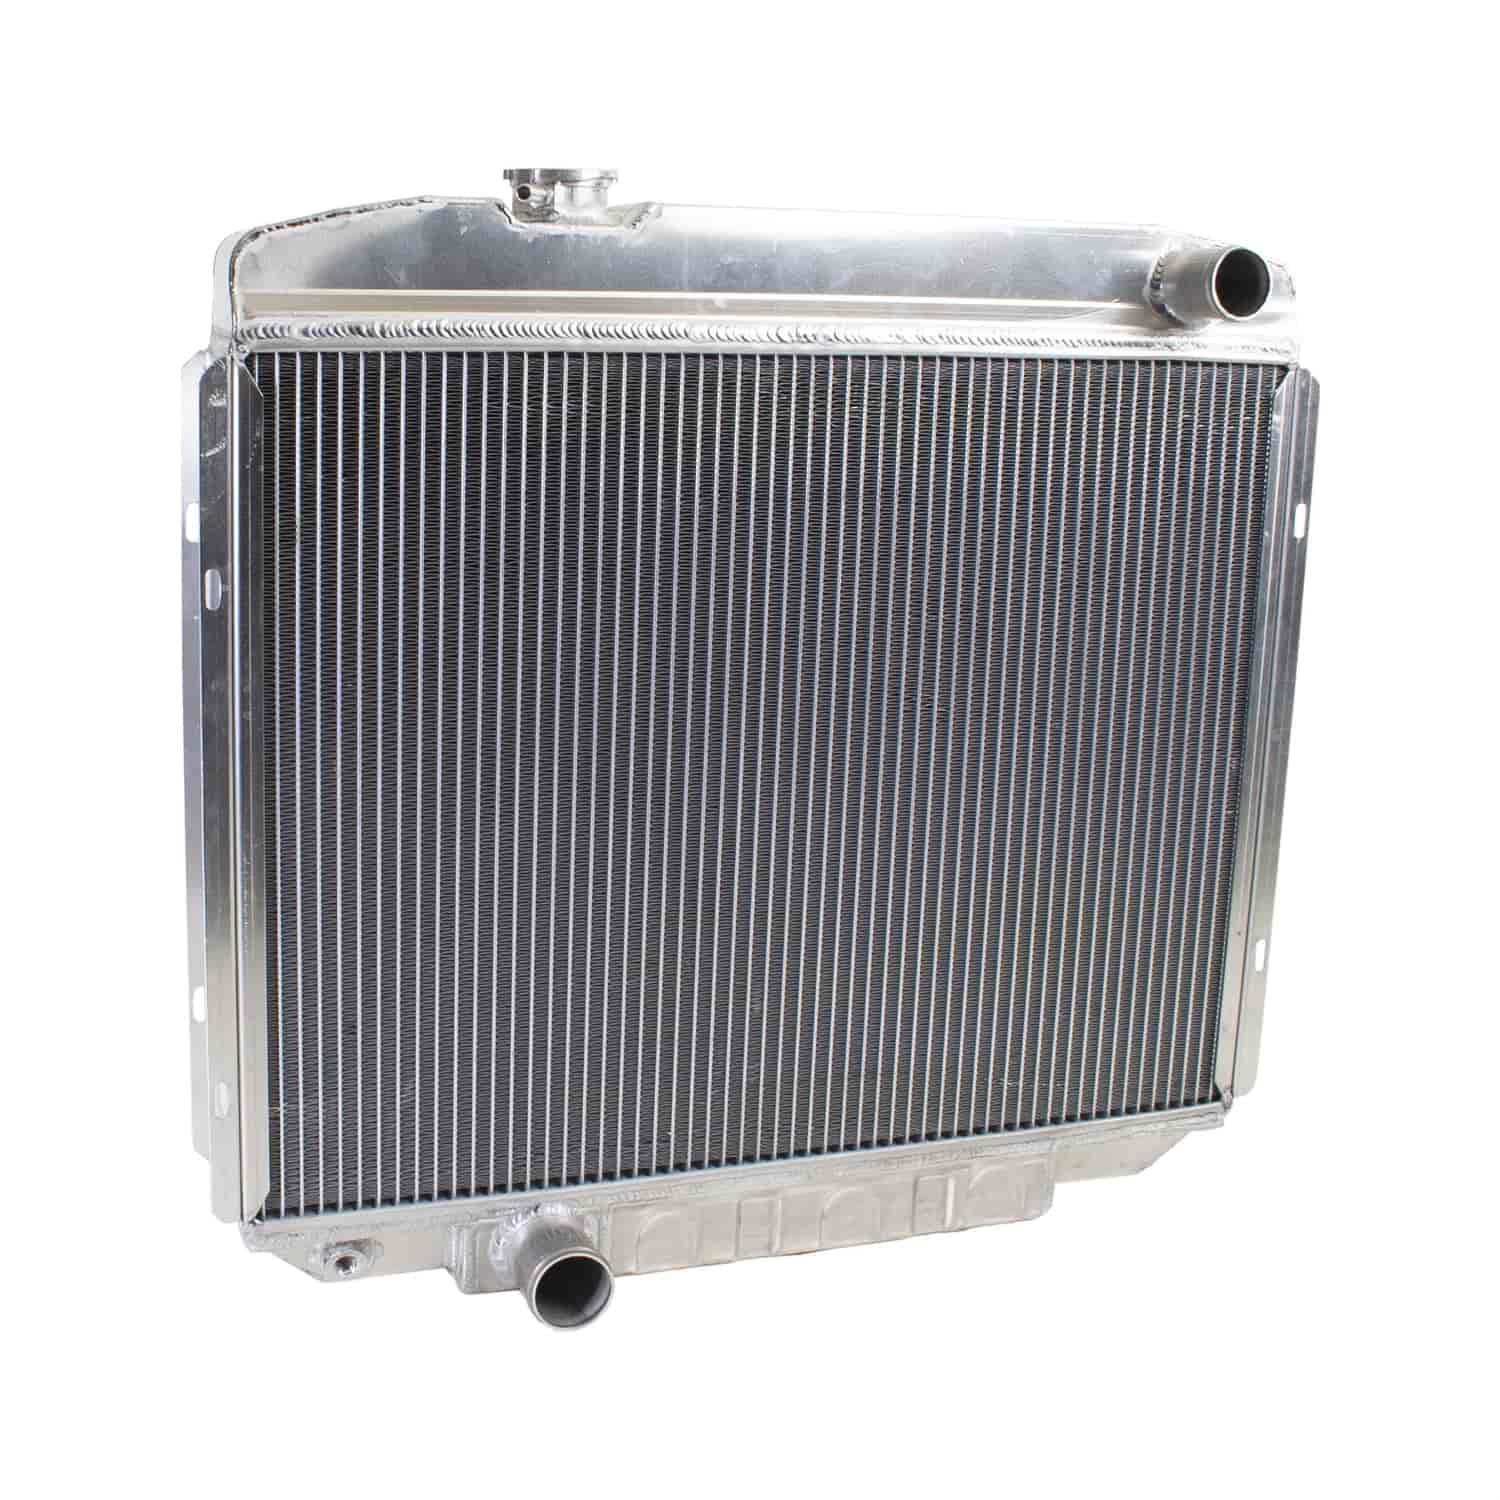 ExactFit Radiator for 1965-1966 Ford Galaxie w/ Late